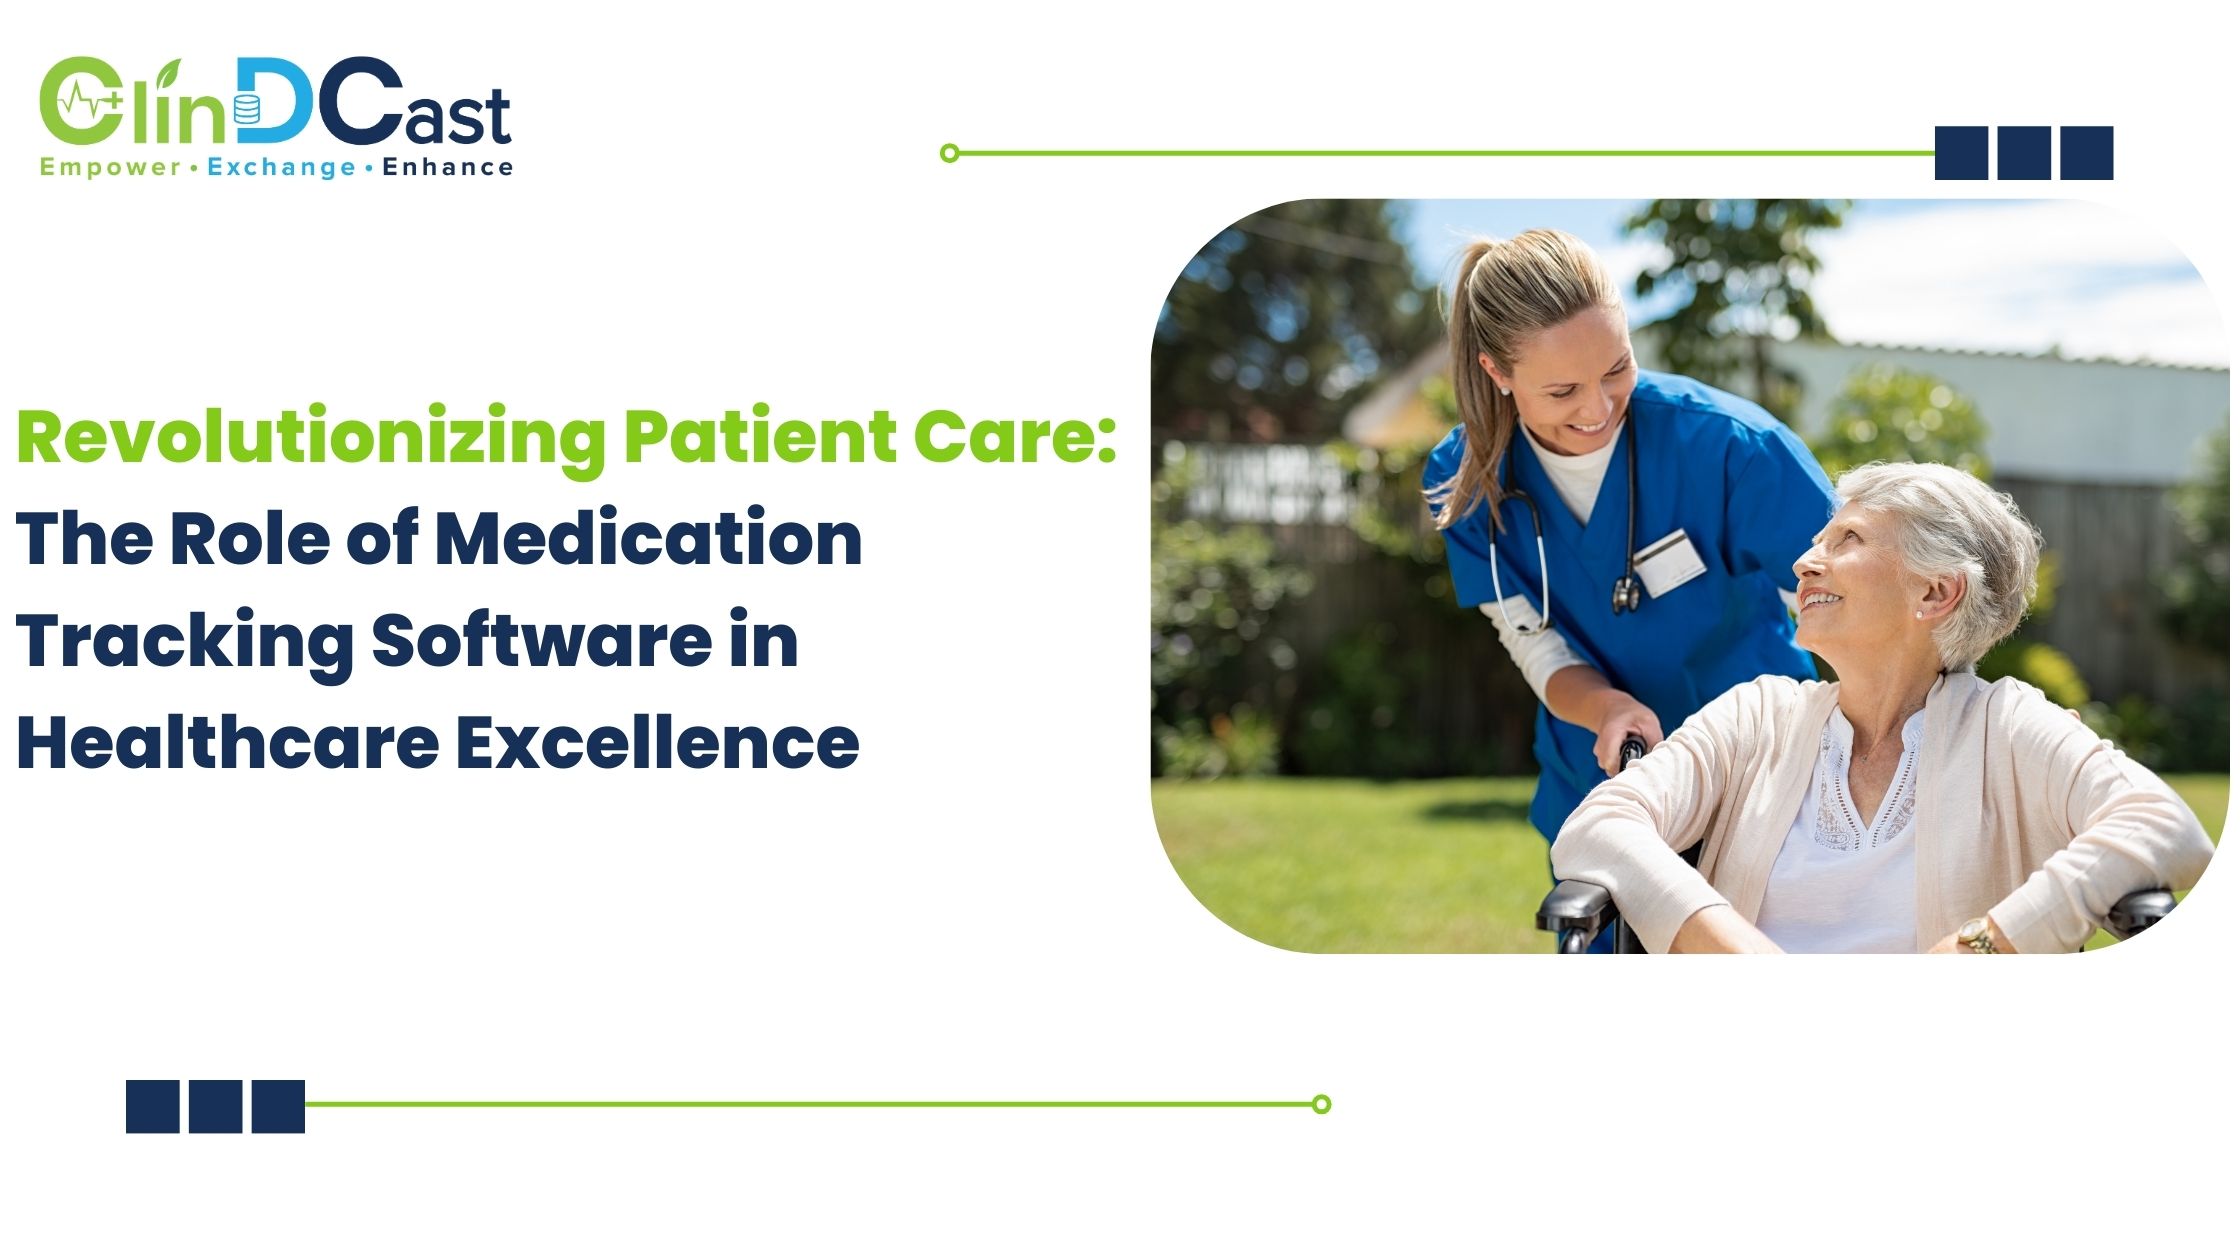 Revolutionizing Patient Care: The Role of Medication Tracking Software in Healthcare Excellence